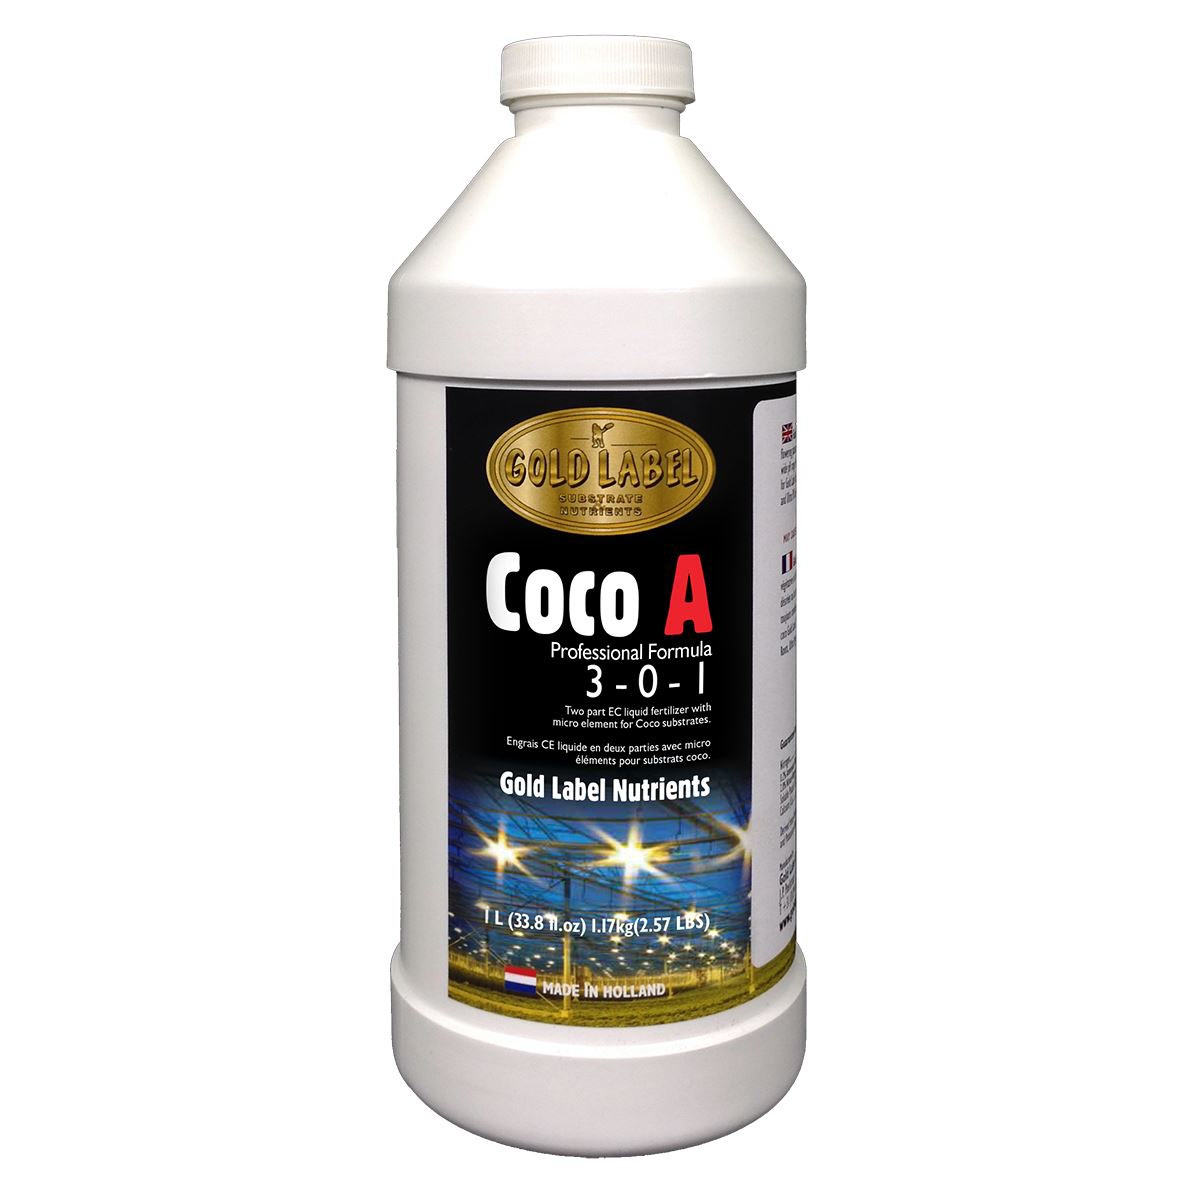 Coco A by Gold Label